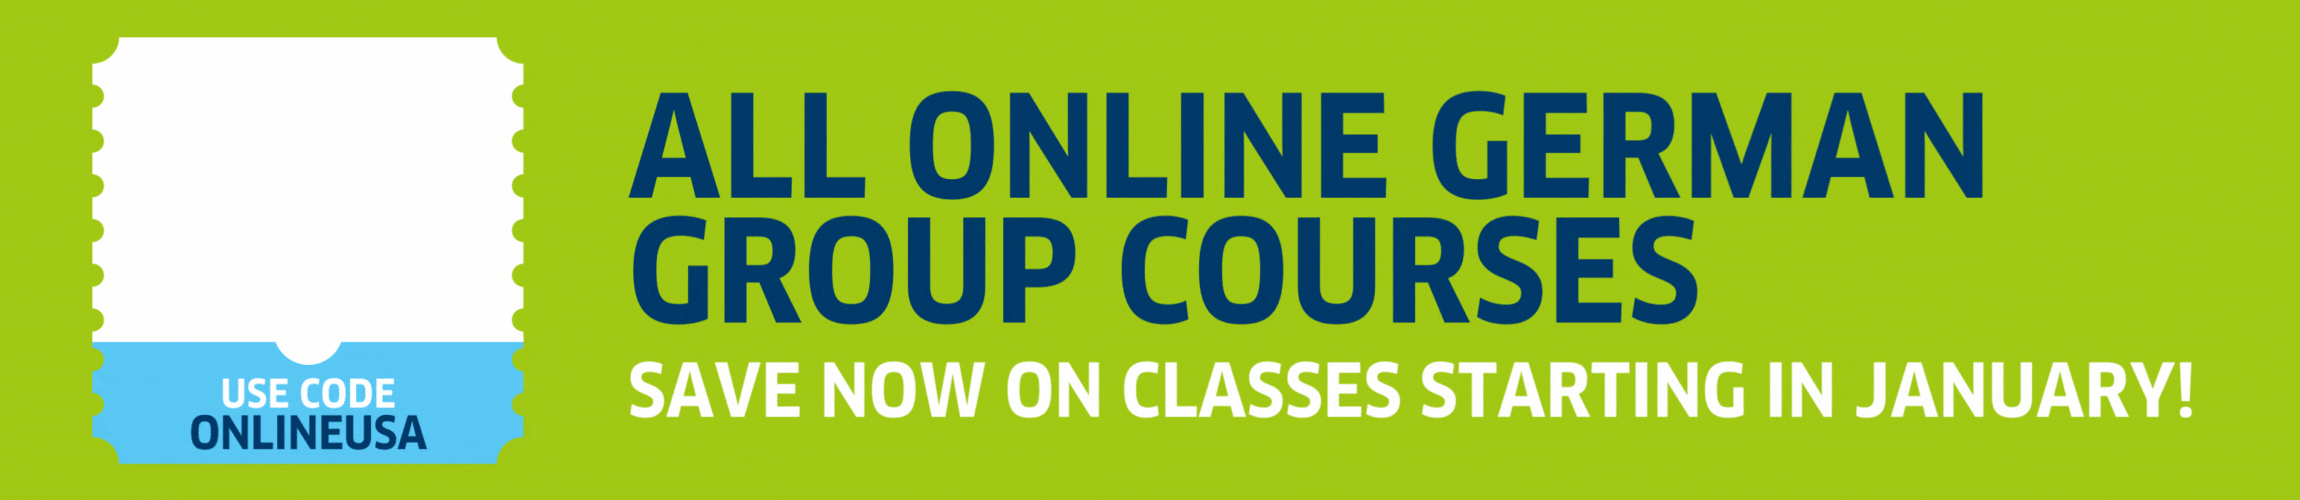  save 20% on online group courses with code ONLINEUSA